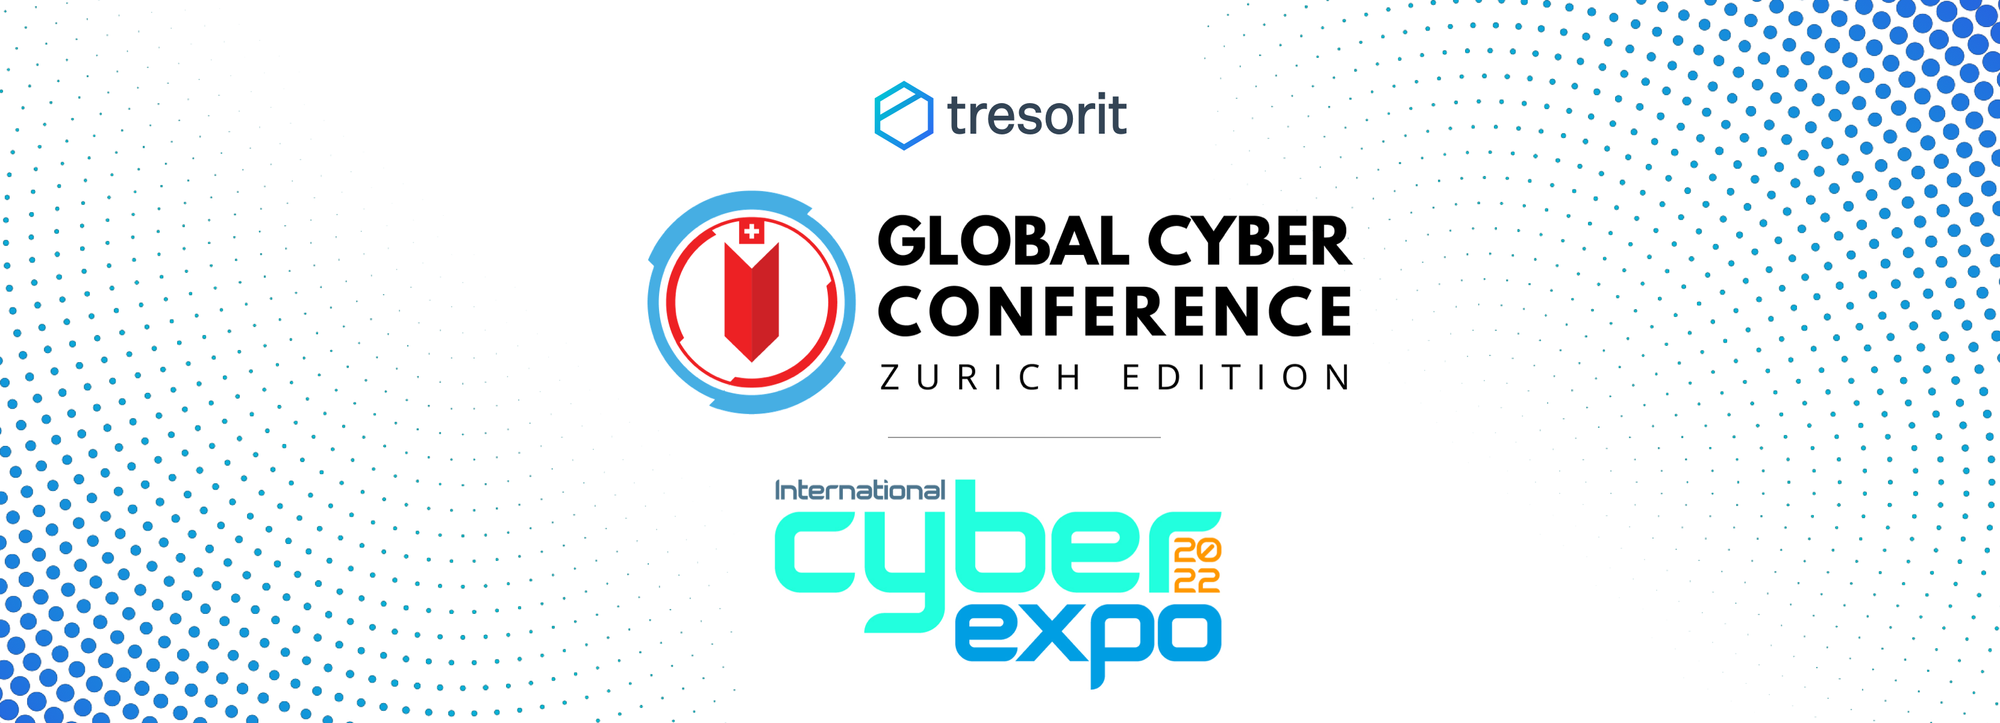 Logos of Tresorit, Global Cyber Conference and International Cyber Expo